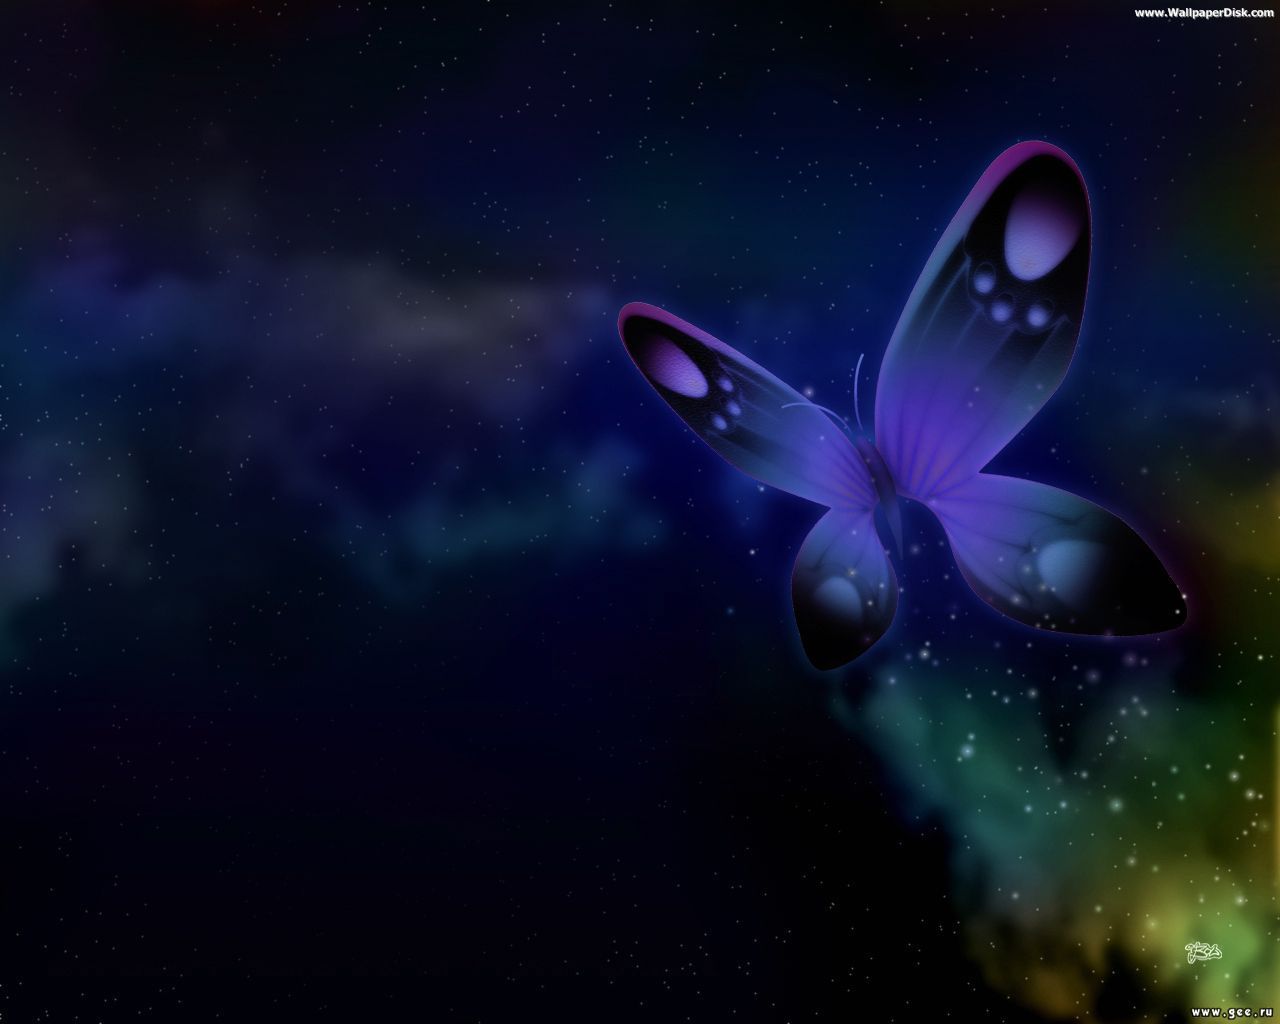 Wallpaper 3d Butterfly And Pictures